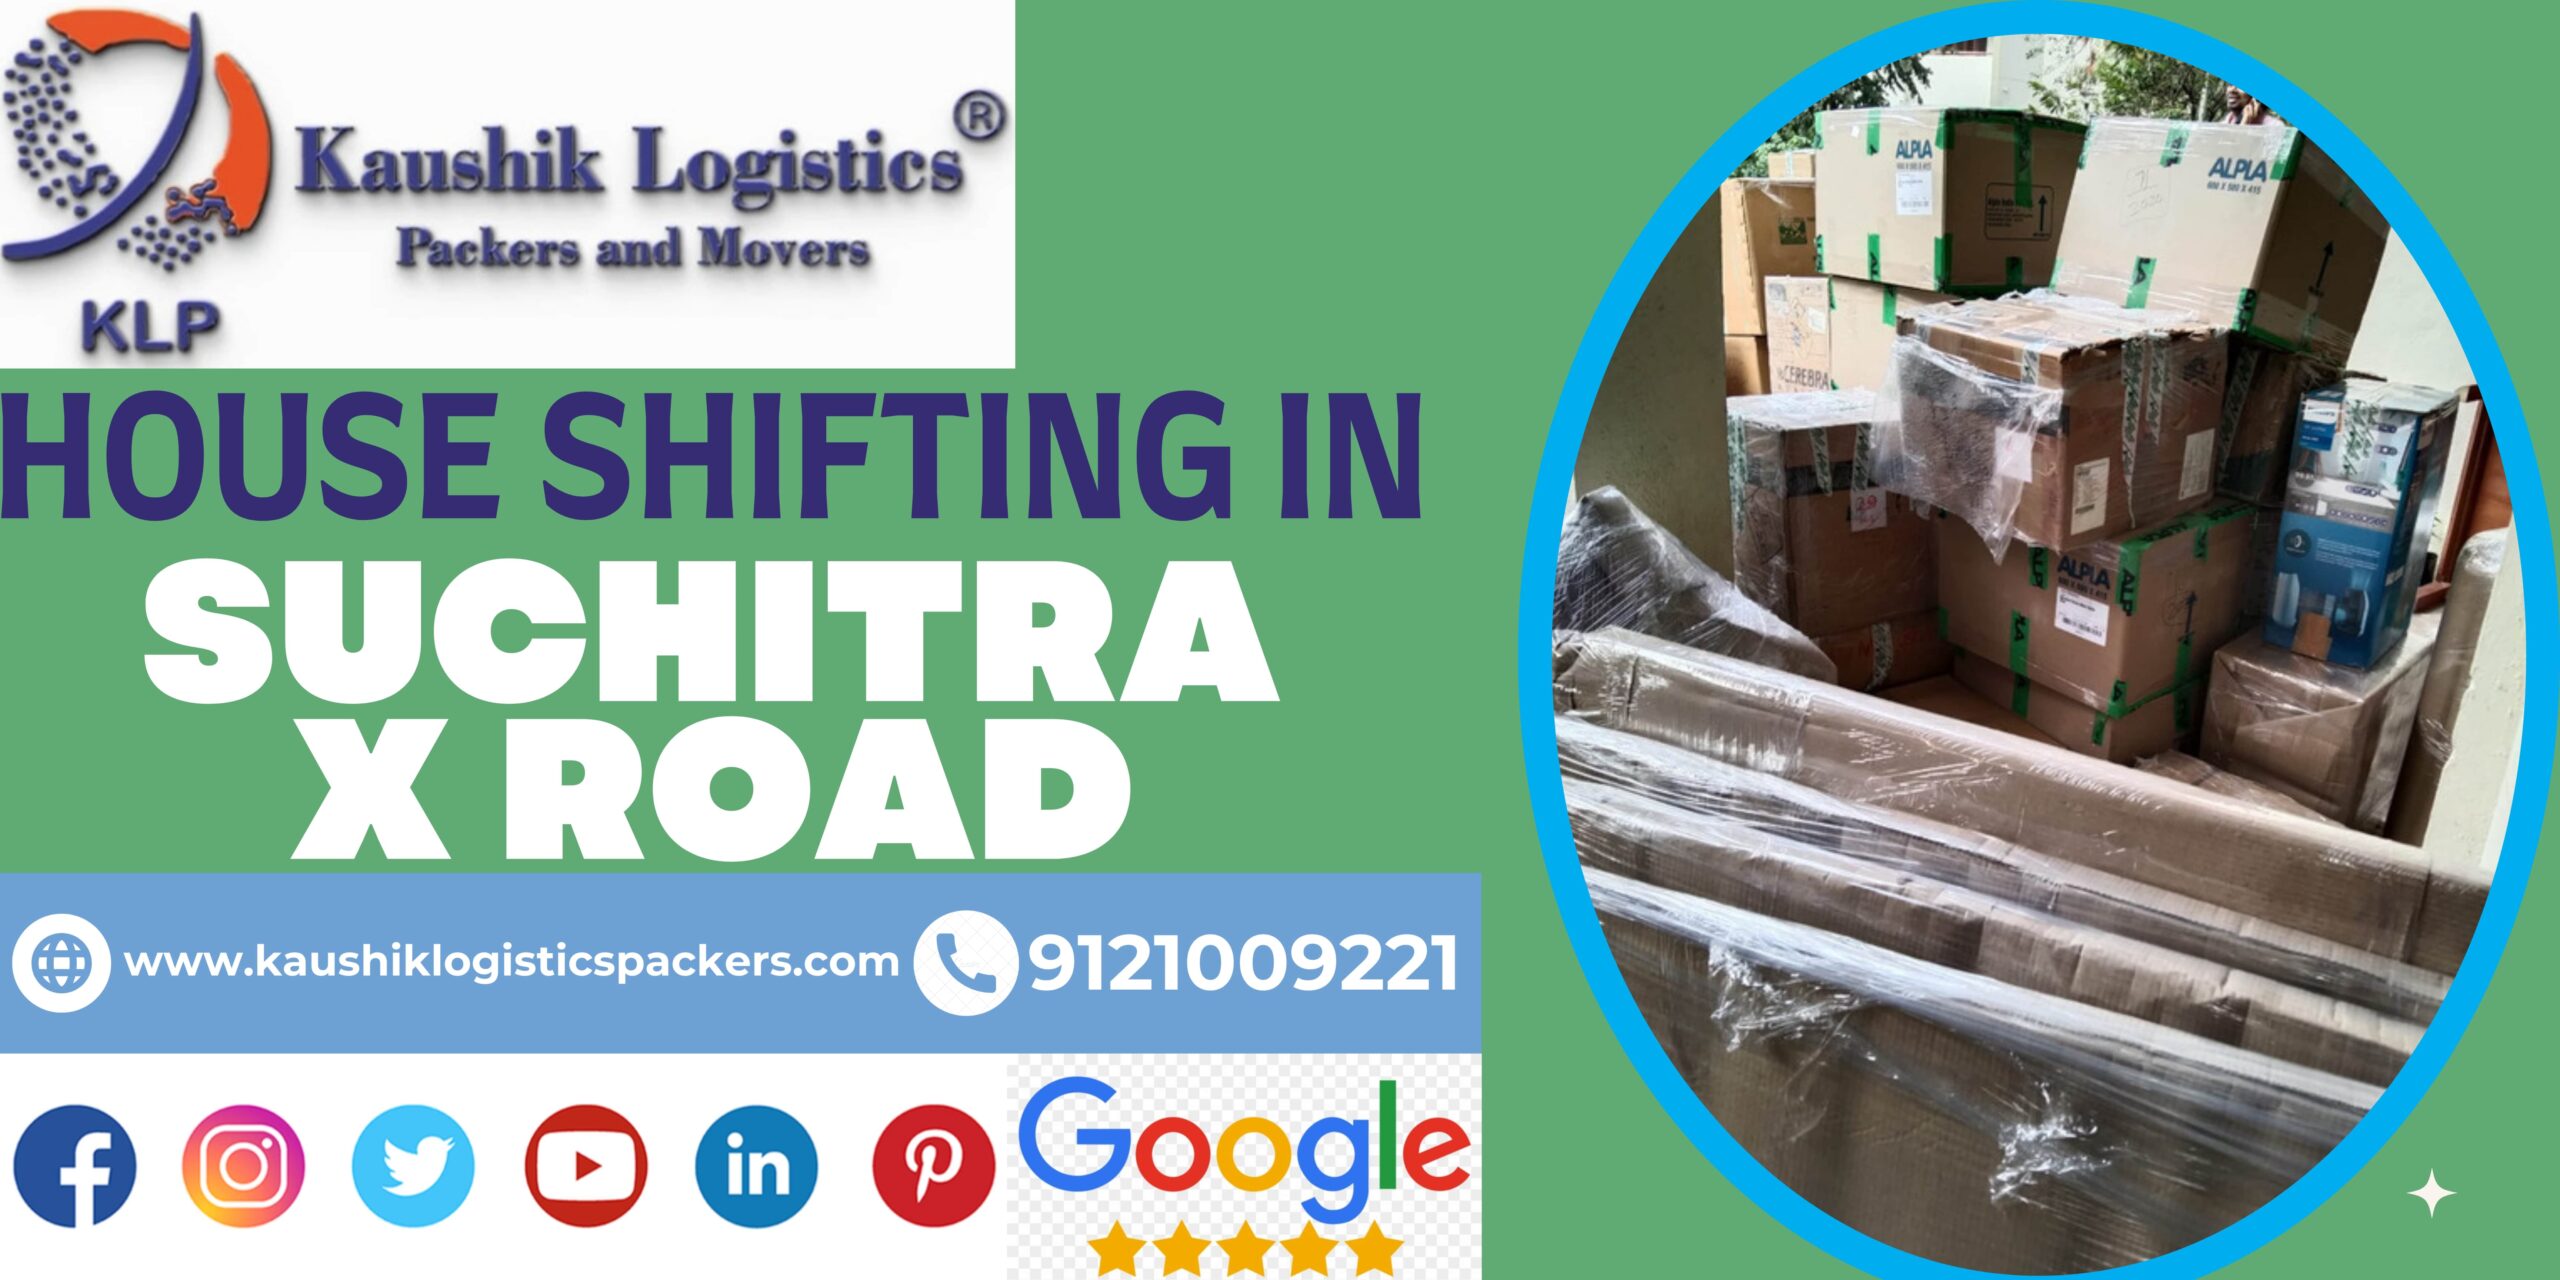 Packers and Movers In Suchitra X Road